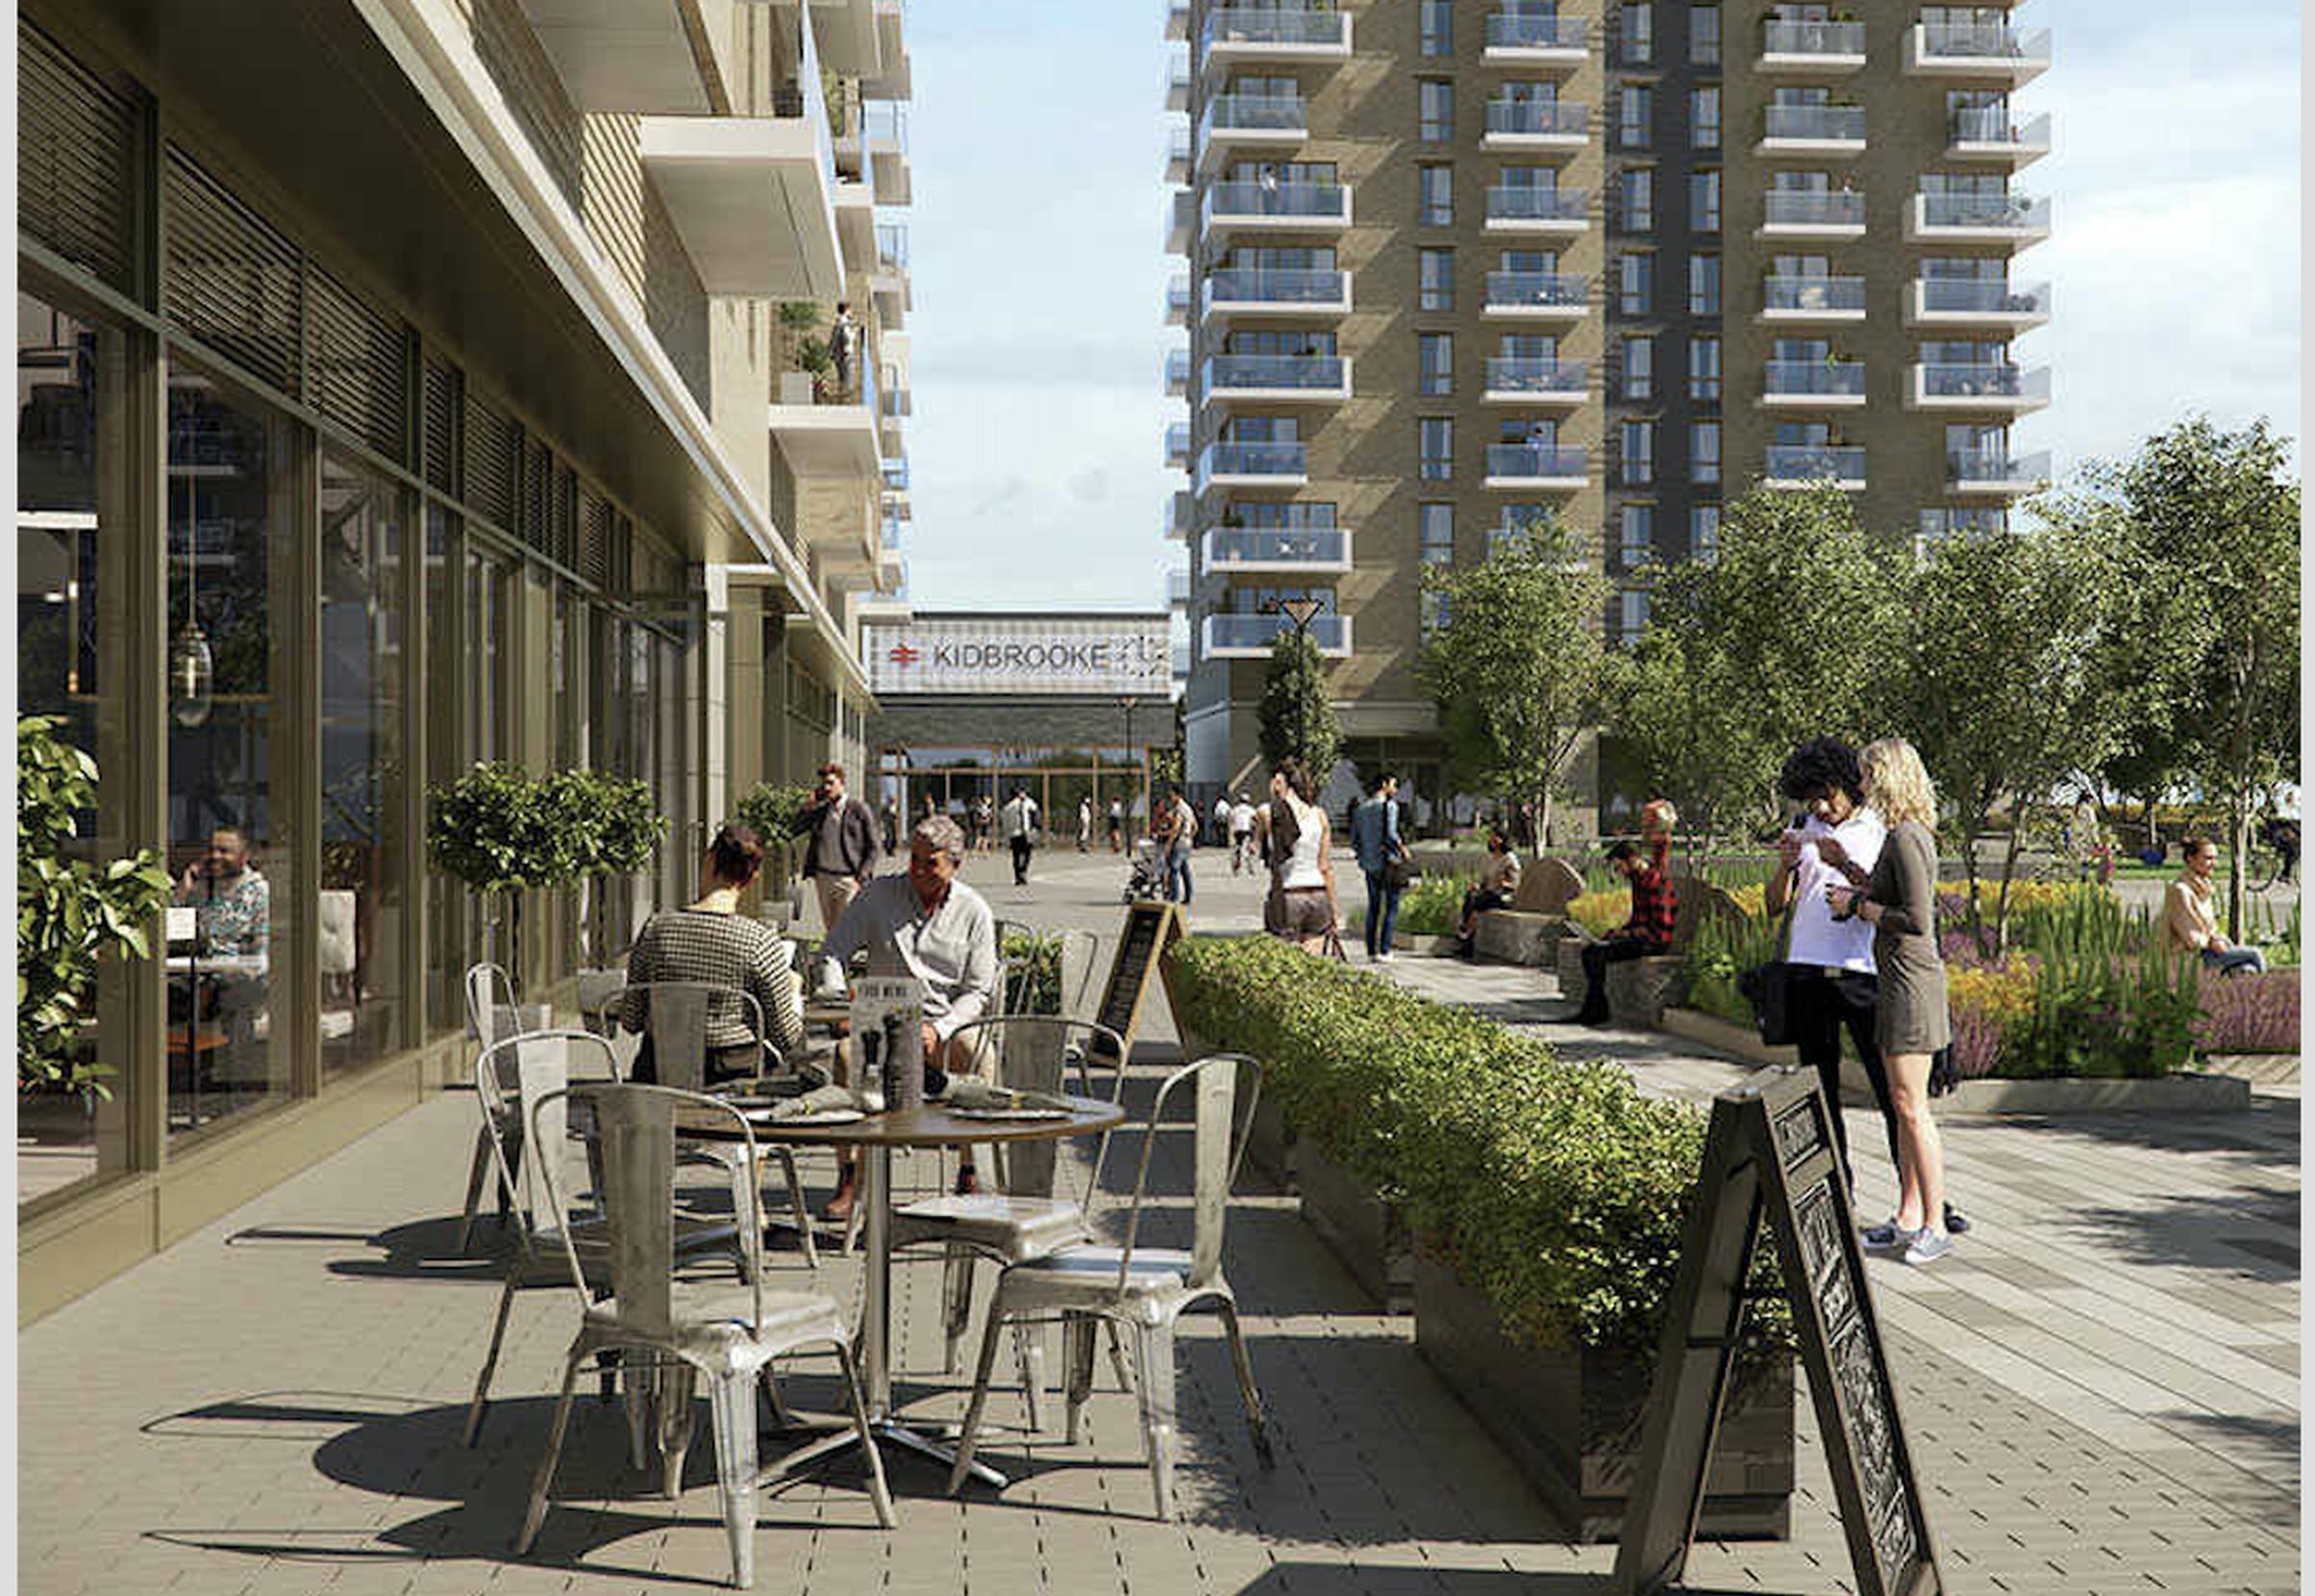 The new Kidbrooke development in London has a station to ensure good connectivity Photo: Berkeley Homes